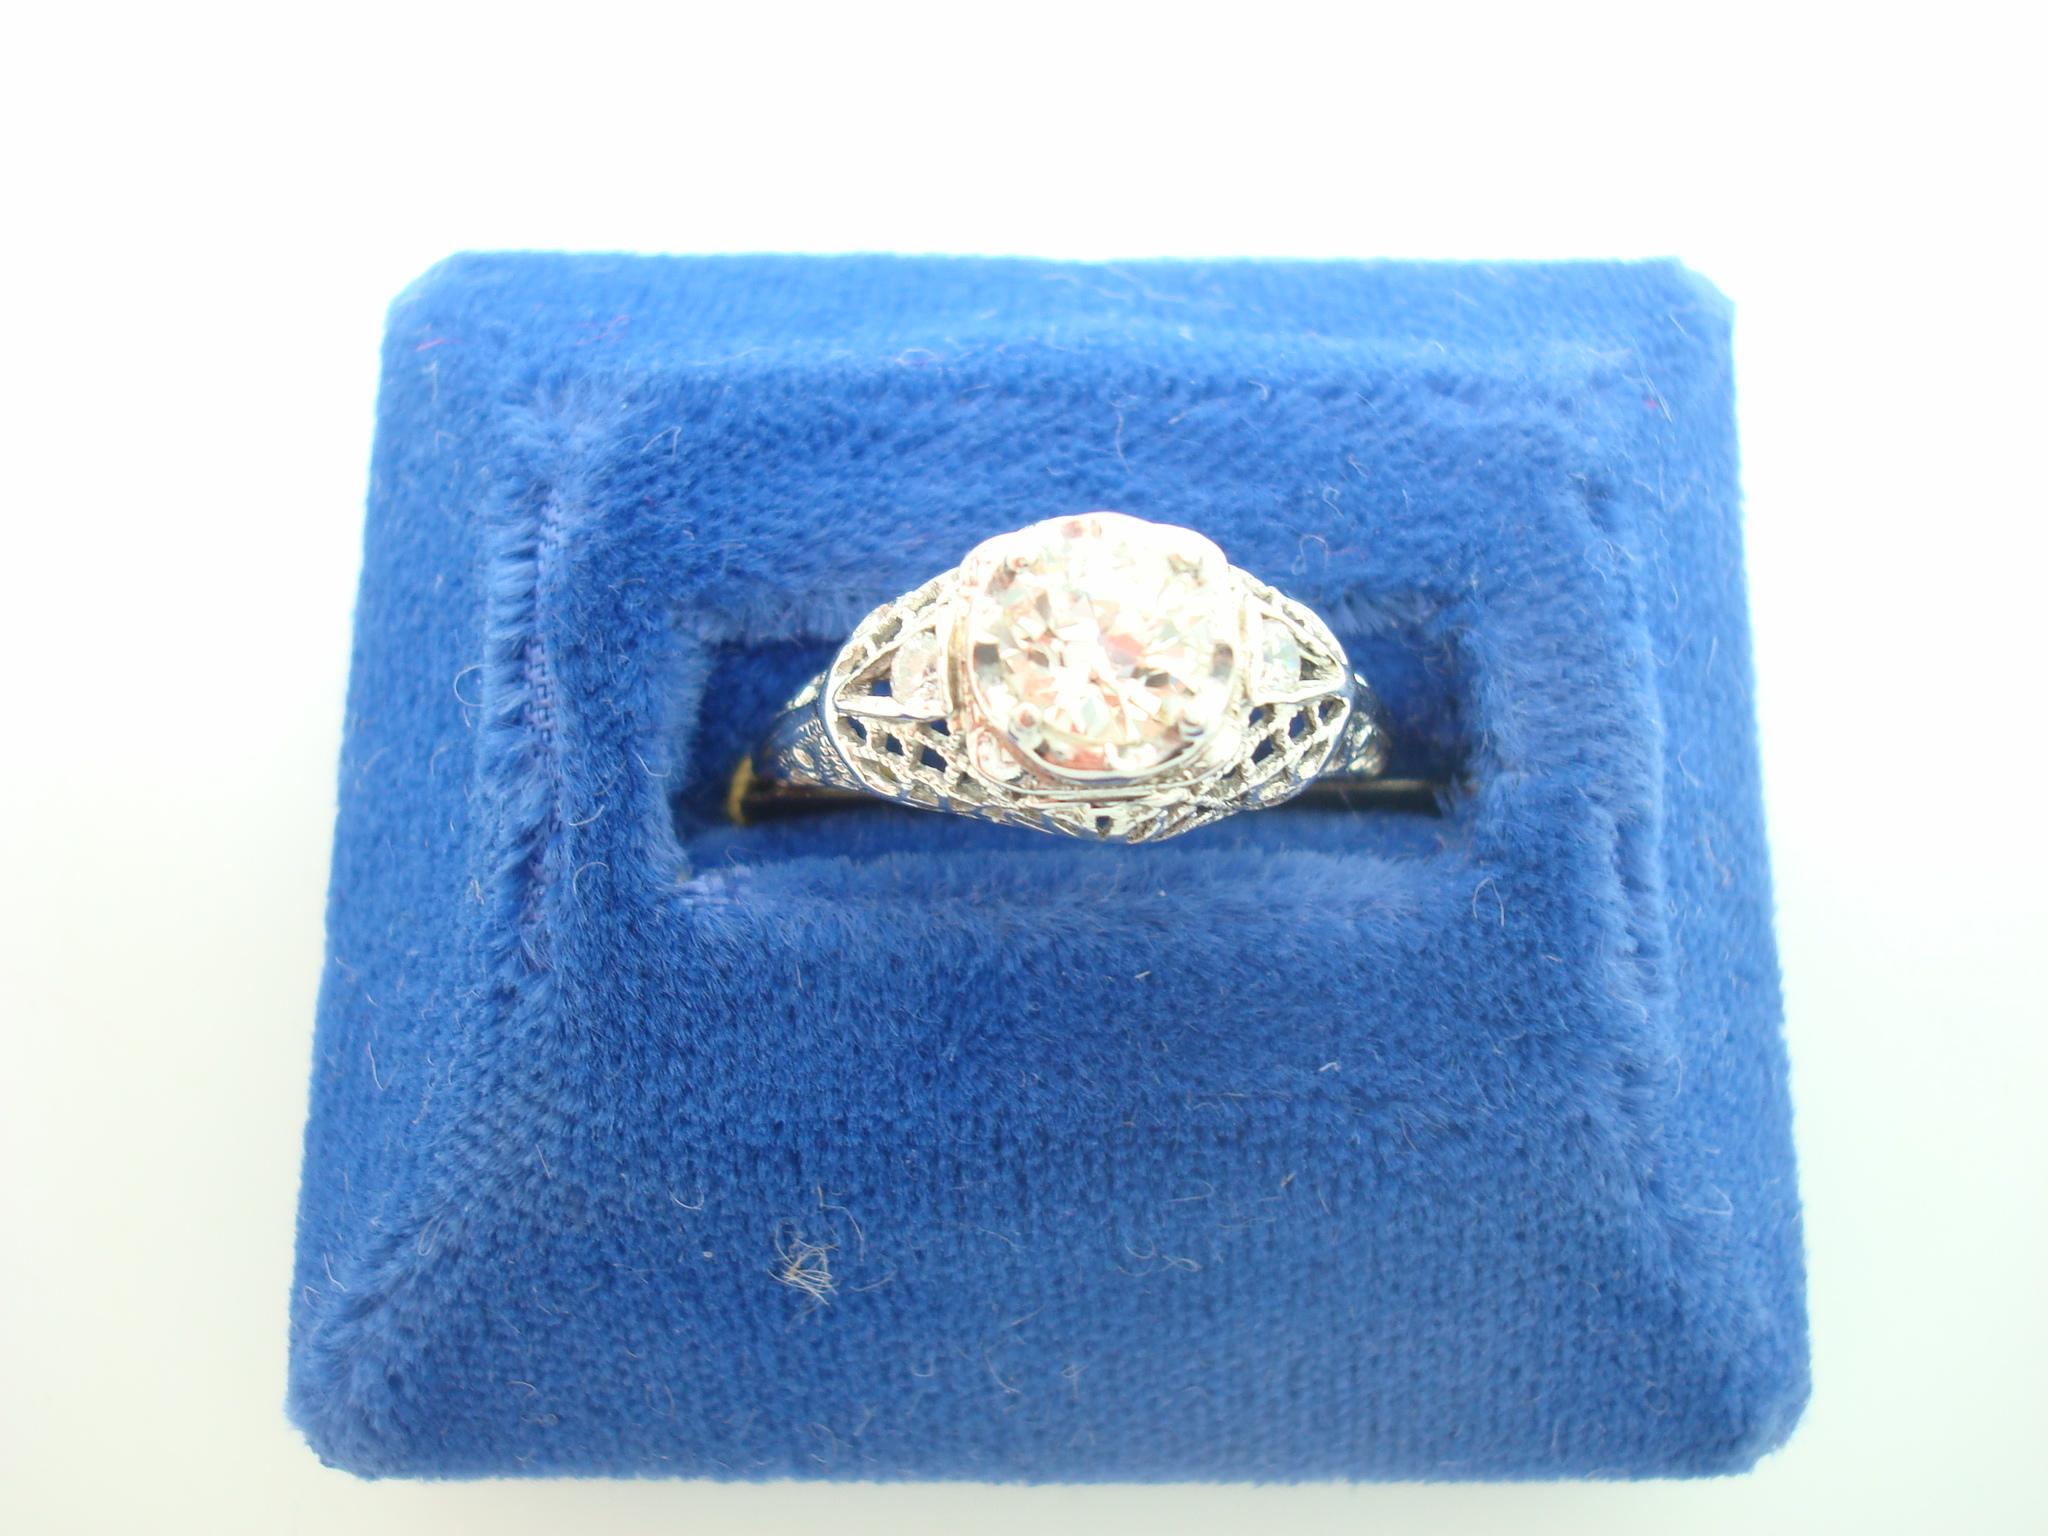 Art Deco 18k White Gold Genuine Natural Diamond Filigree Ring .56ct (#J2360)

18k white gold diamond filigree ring featuring a European cut diamond weighing .56cts. The diamond is accented by two small round diamond accents. The diamonds have fine